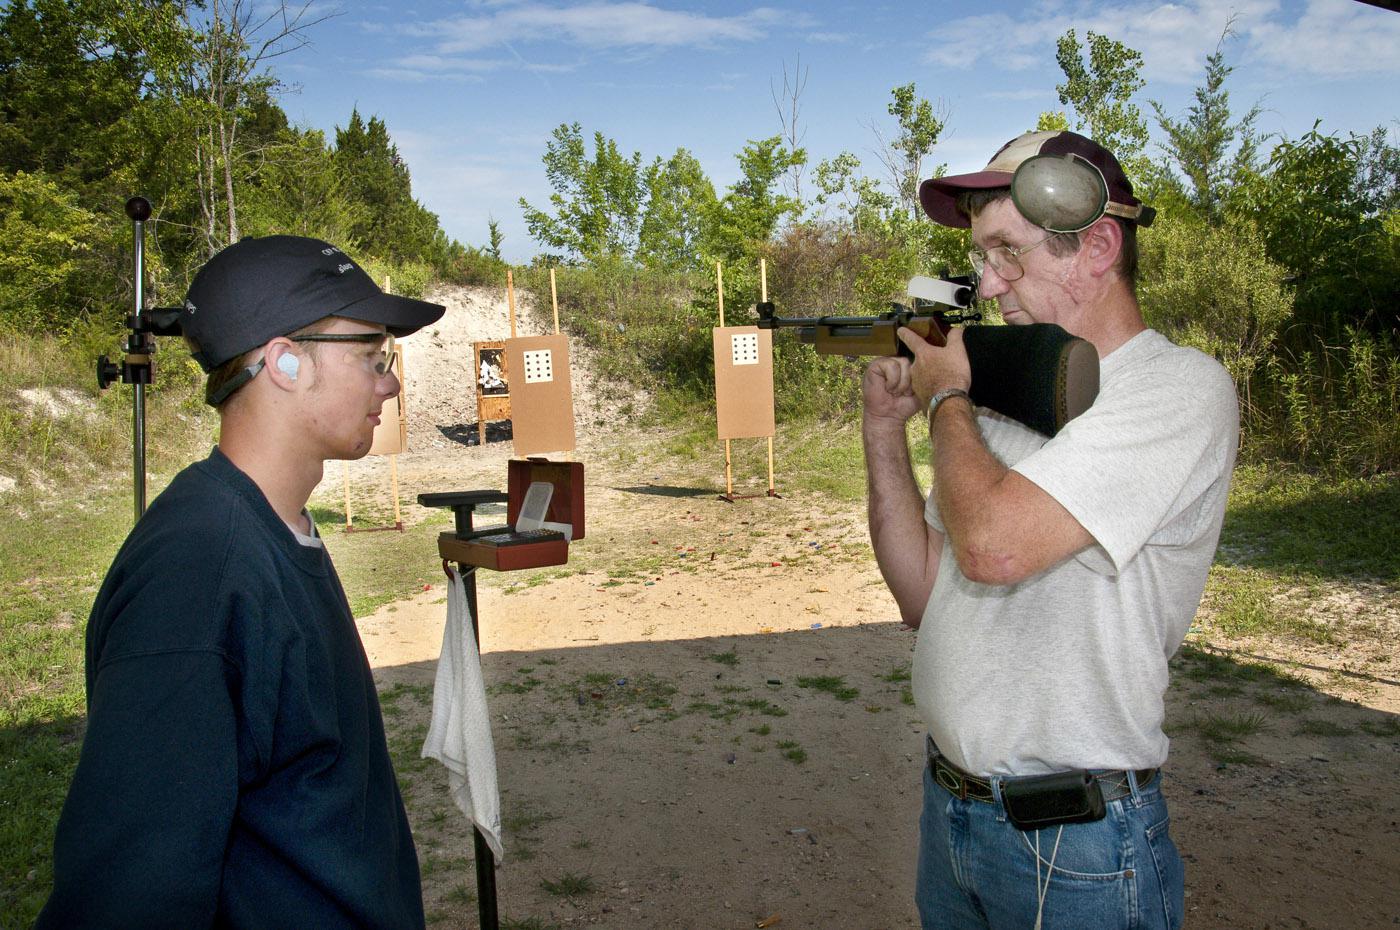 Luke South of Tishomingo County receives instruction from Coach William Baldwin at the Mississippi 4-H National Shooting Sports team practice held at the Starkville Gun Club. (Photo by Scott Corey)